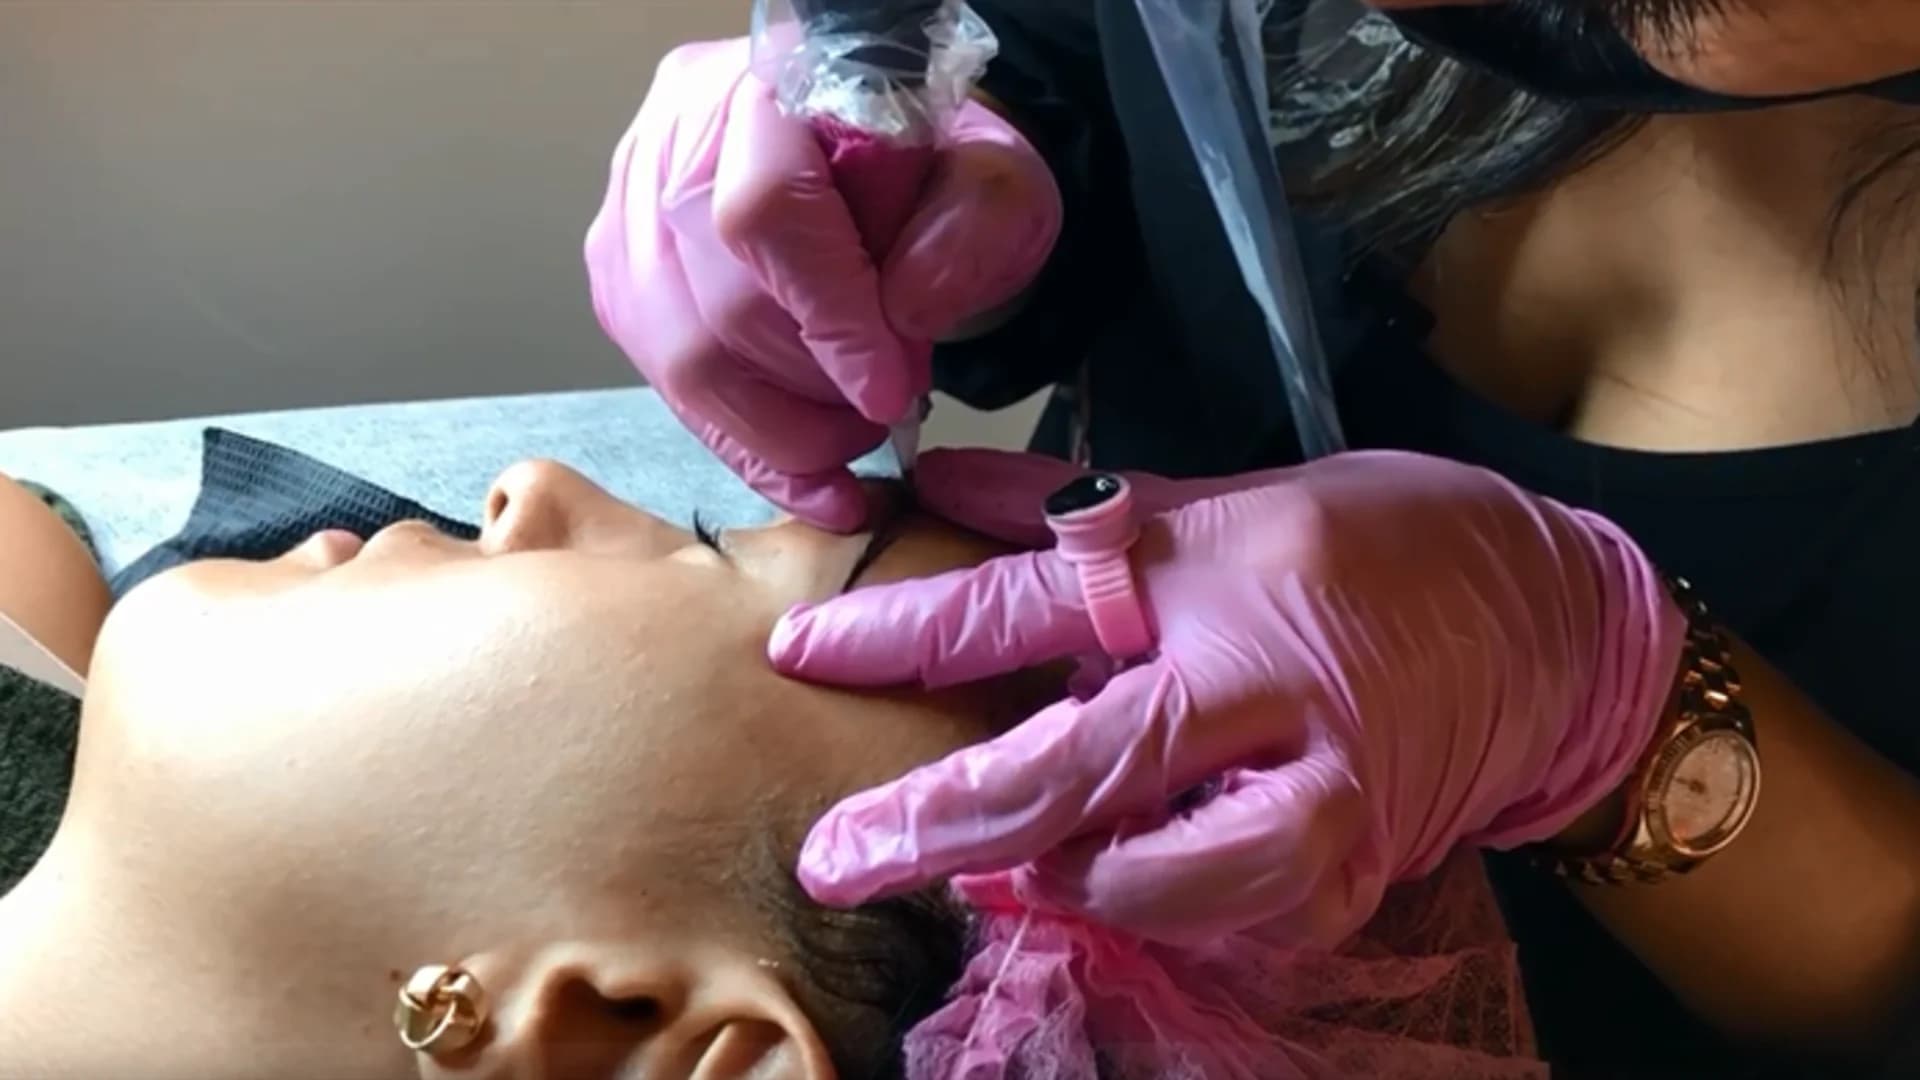 Ombre-powdered eyebrows provide alternative to tattooing